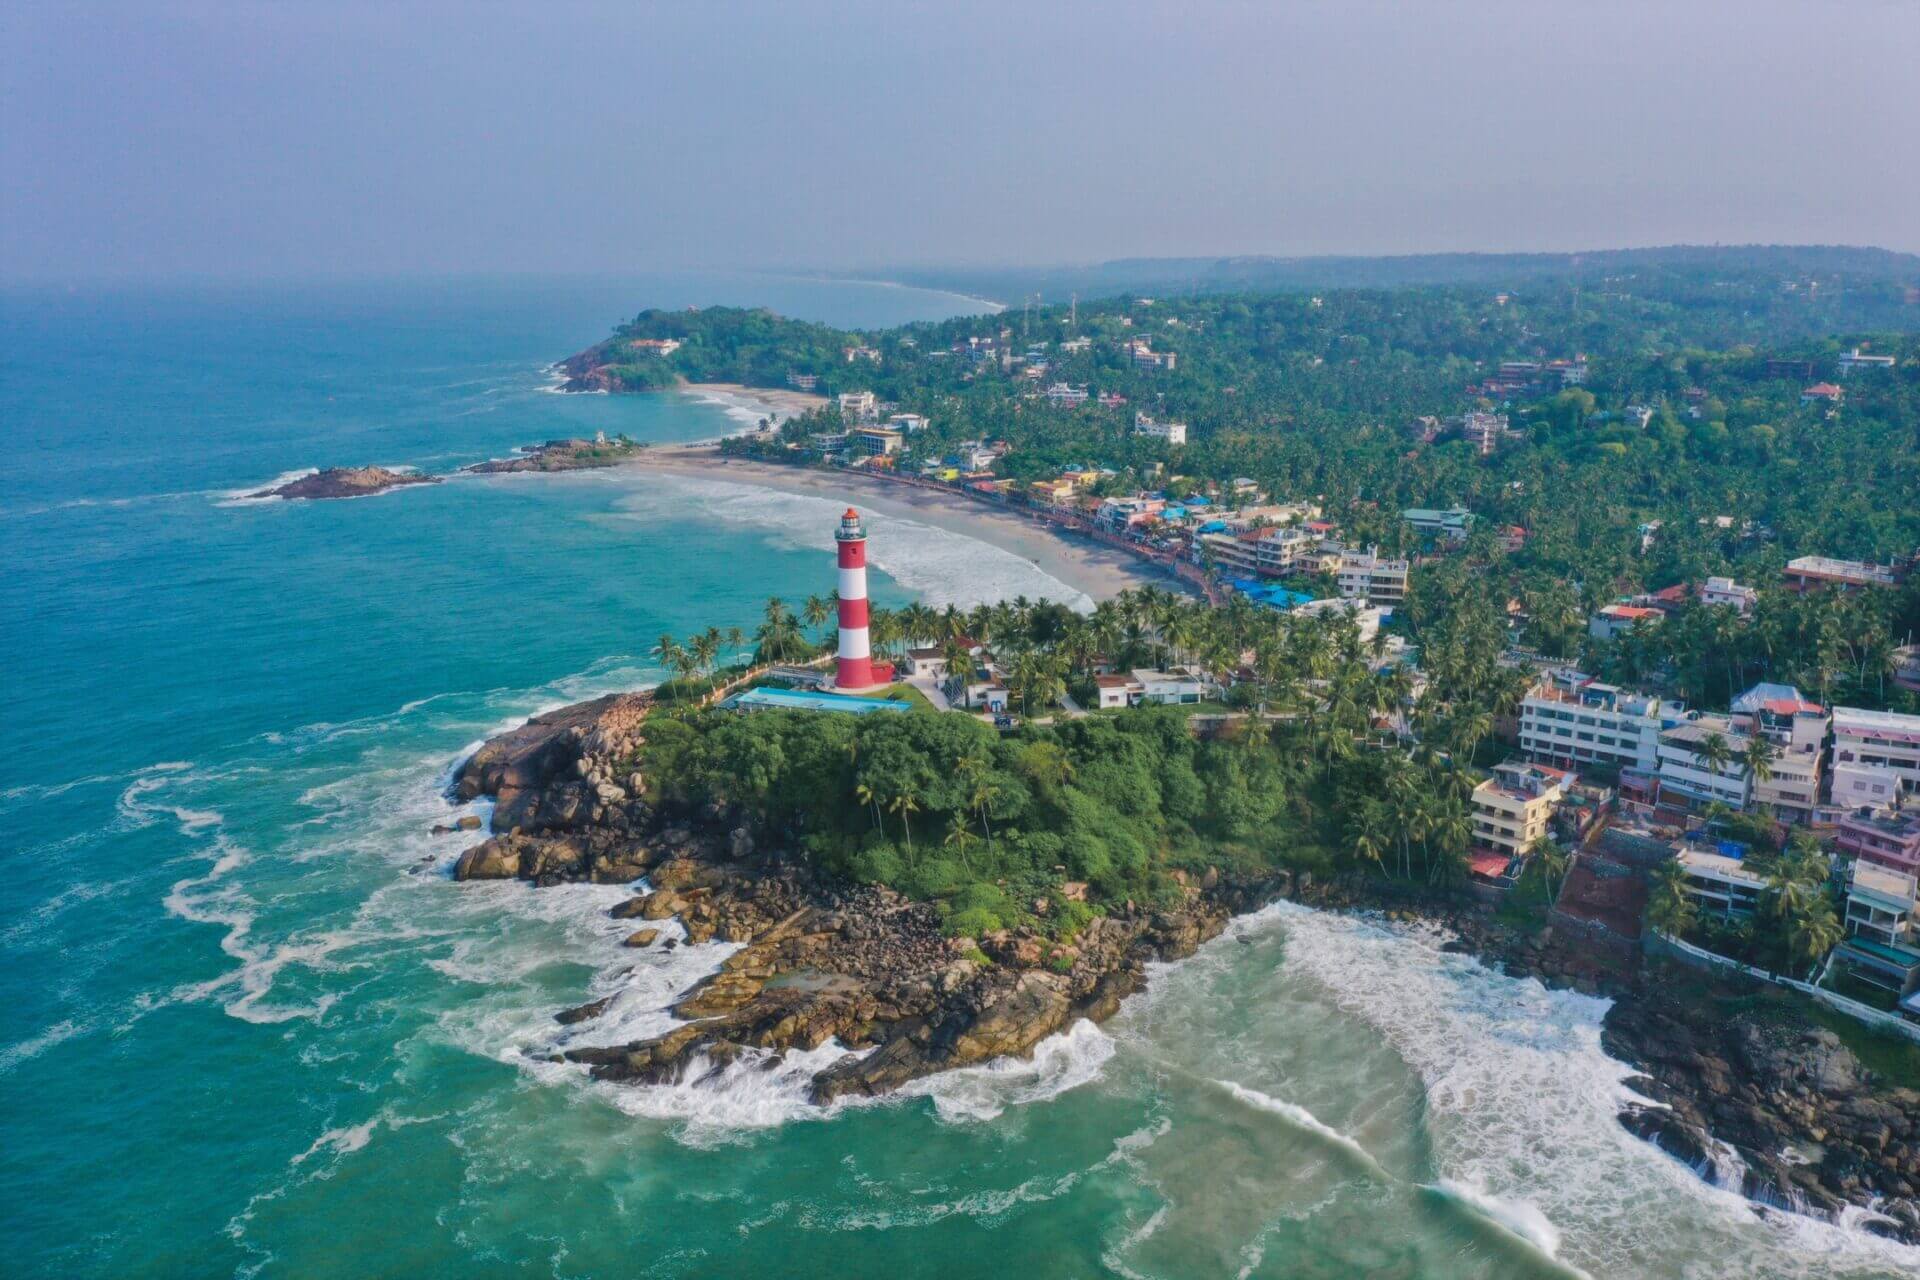 Book-Trichy-To-Kovalam Beach(Kerala)-Tour-package-Car-Rental-Services